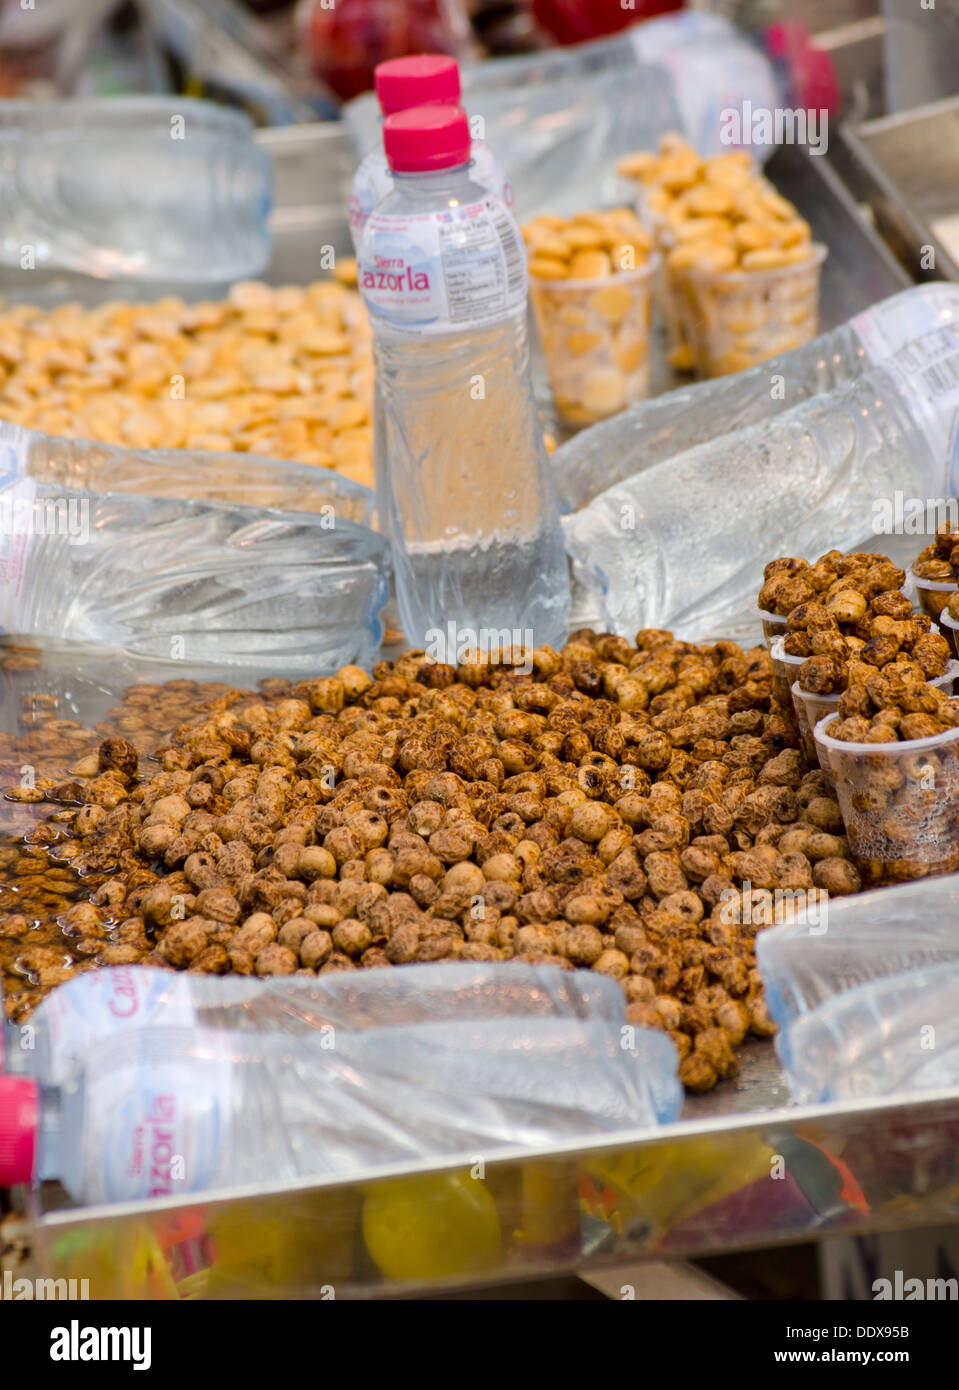 Roasted chick peas and habas beans or white lupin beans and plastic water bottles. Mijas in Southern Spain. Costa del Sol. Stock Photo